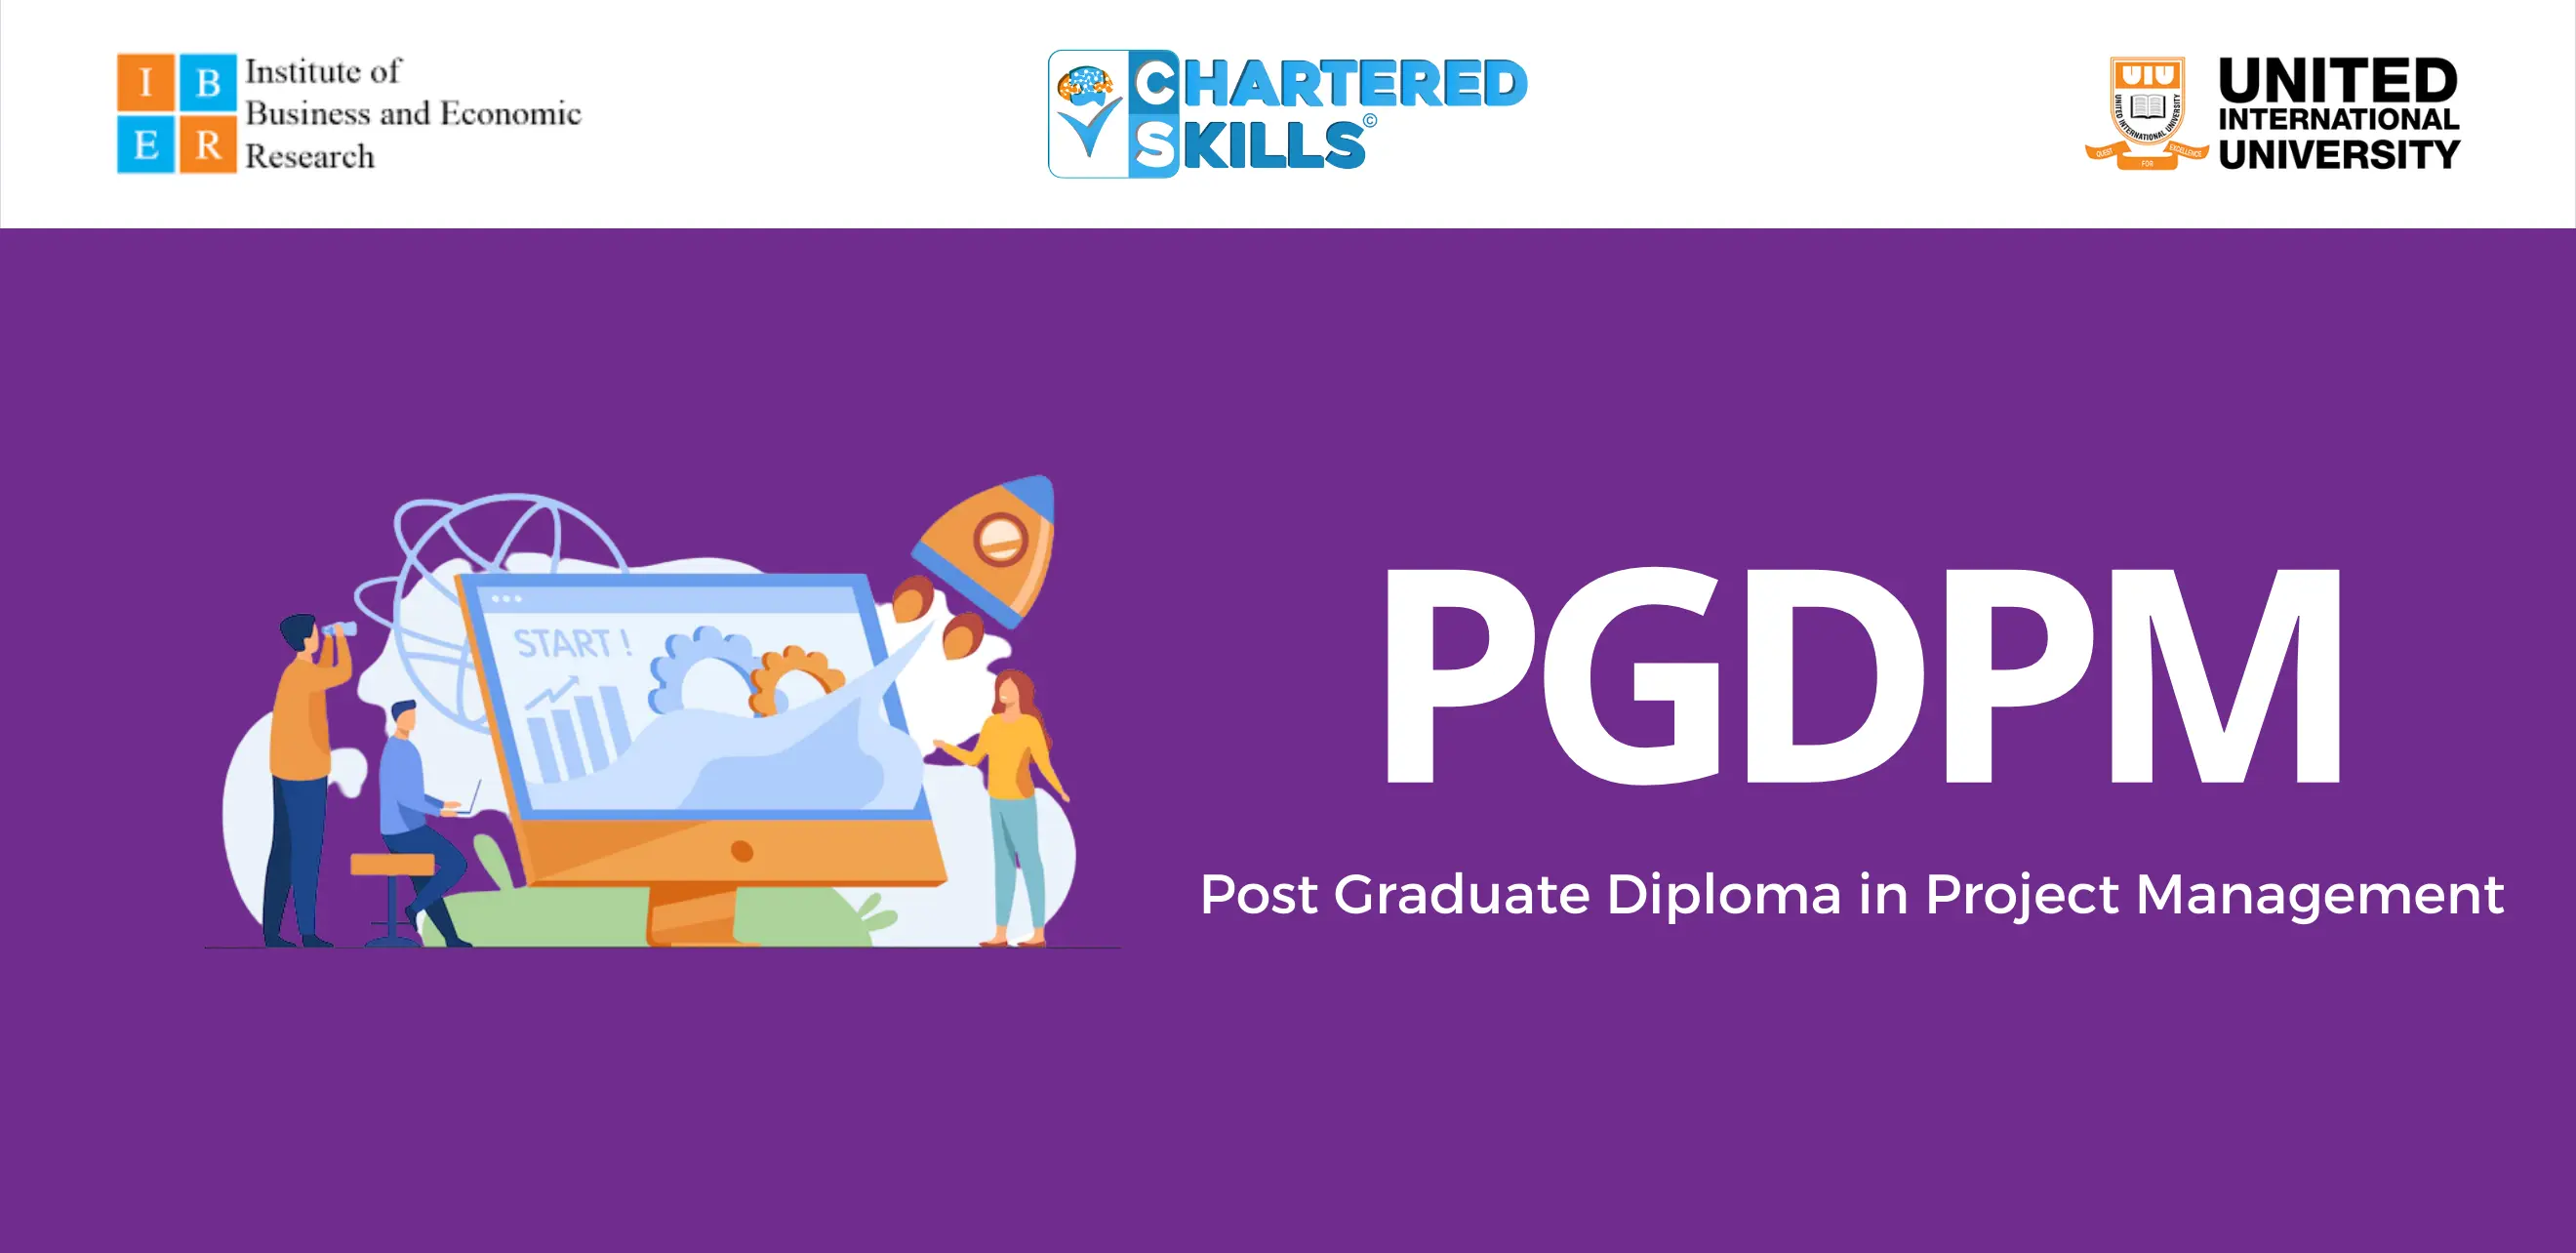 Post Graduate Diploma in Project Management